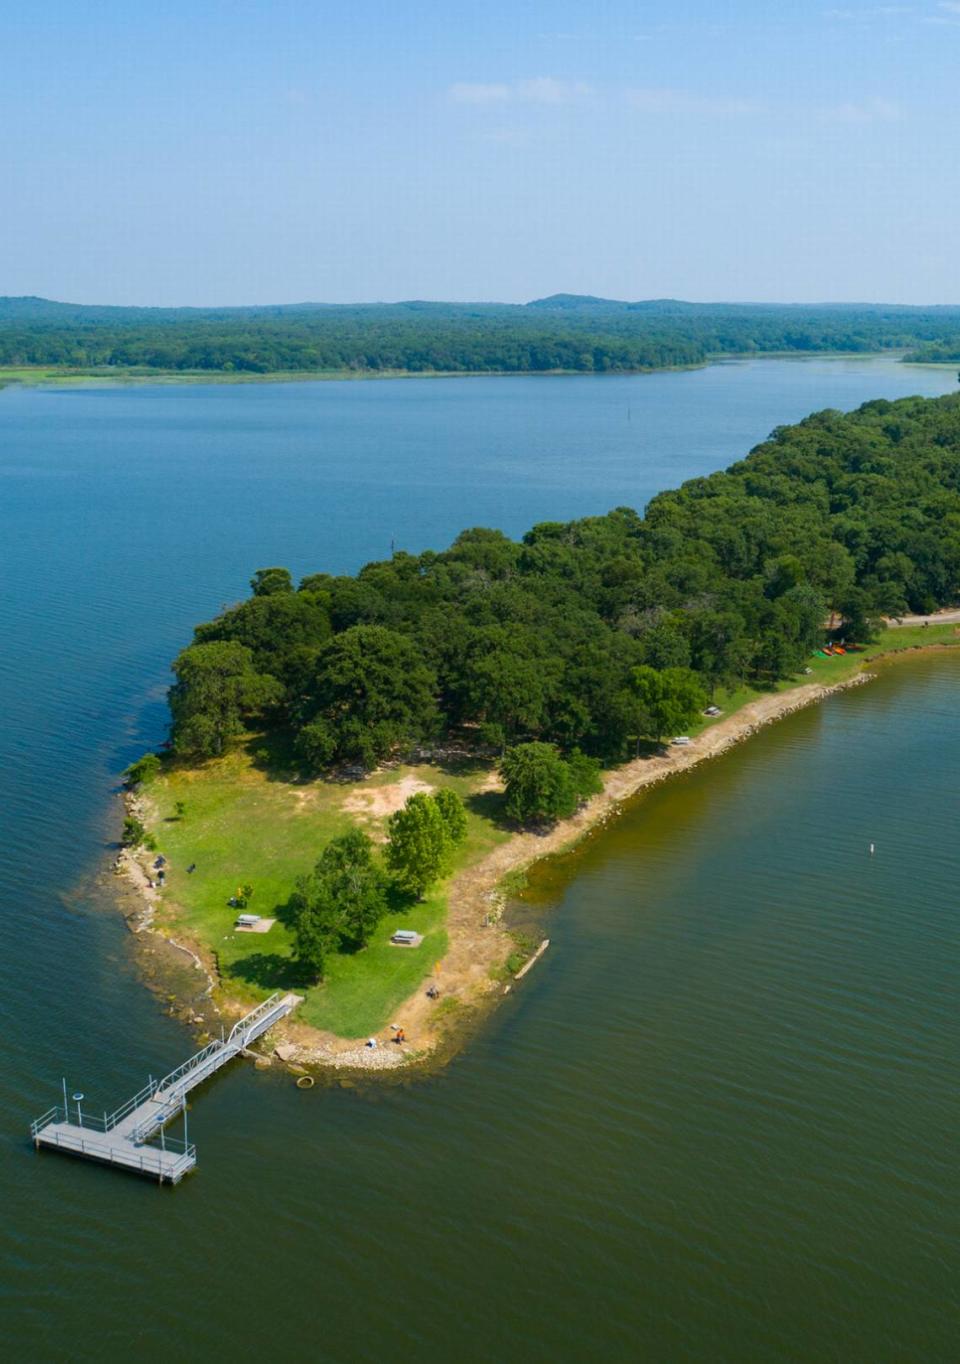 Fairfield Lake State Park, in Freestone County, has been open to the public since 1976. But under a pending sale of the land to a developer, the park could soon close.